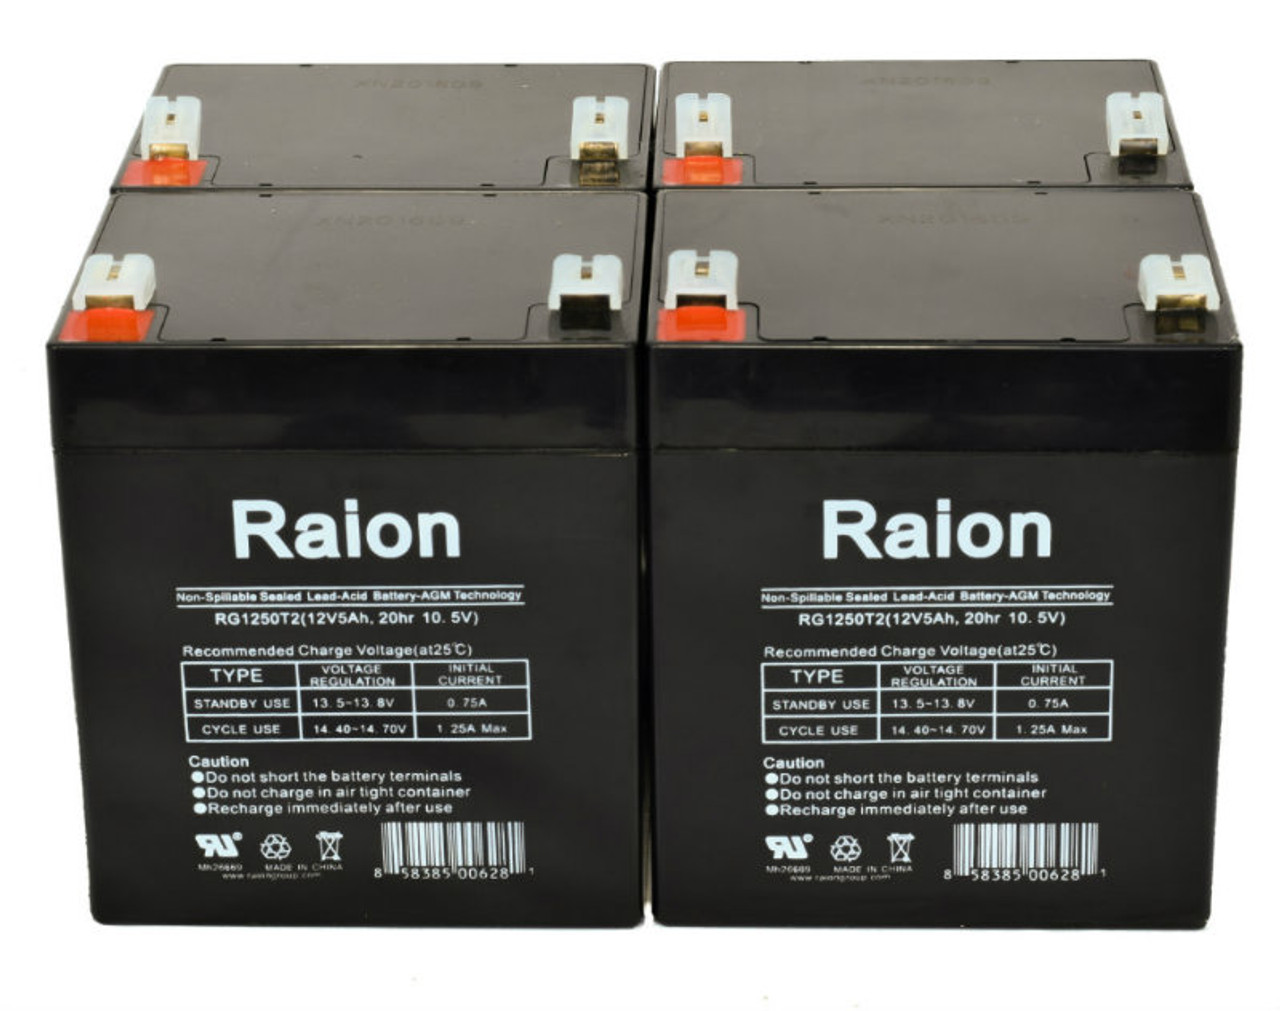 Raion Power 12V 5Ah RG1250T2 Replacement Lead Acid Battery for OzCharge OCB-5-12F2 - 4 Pack